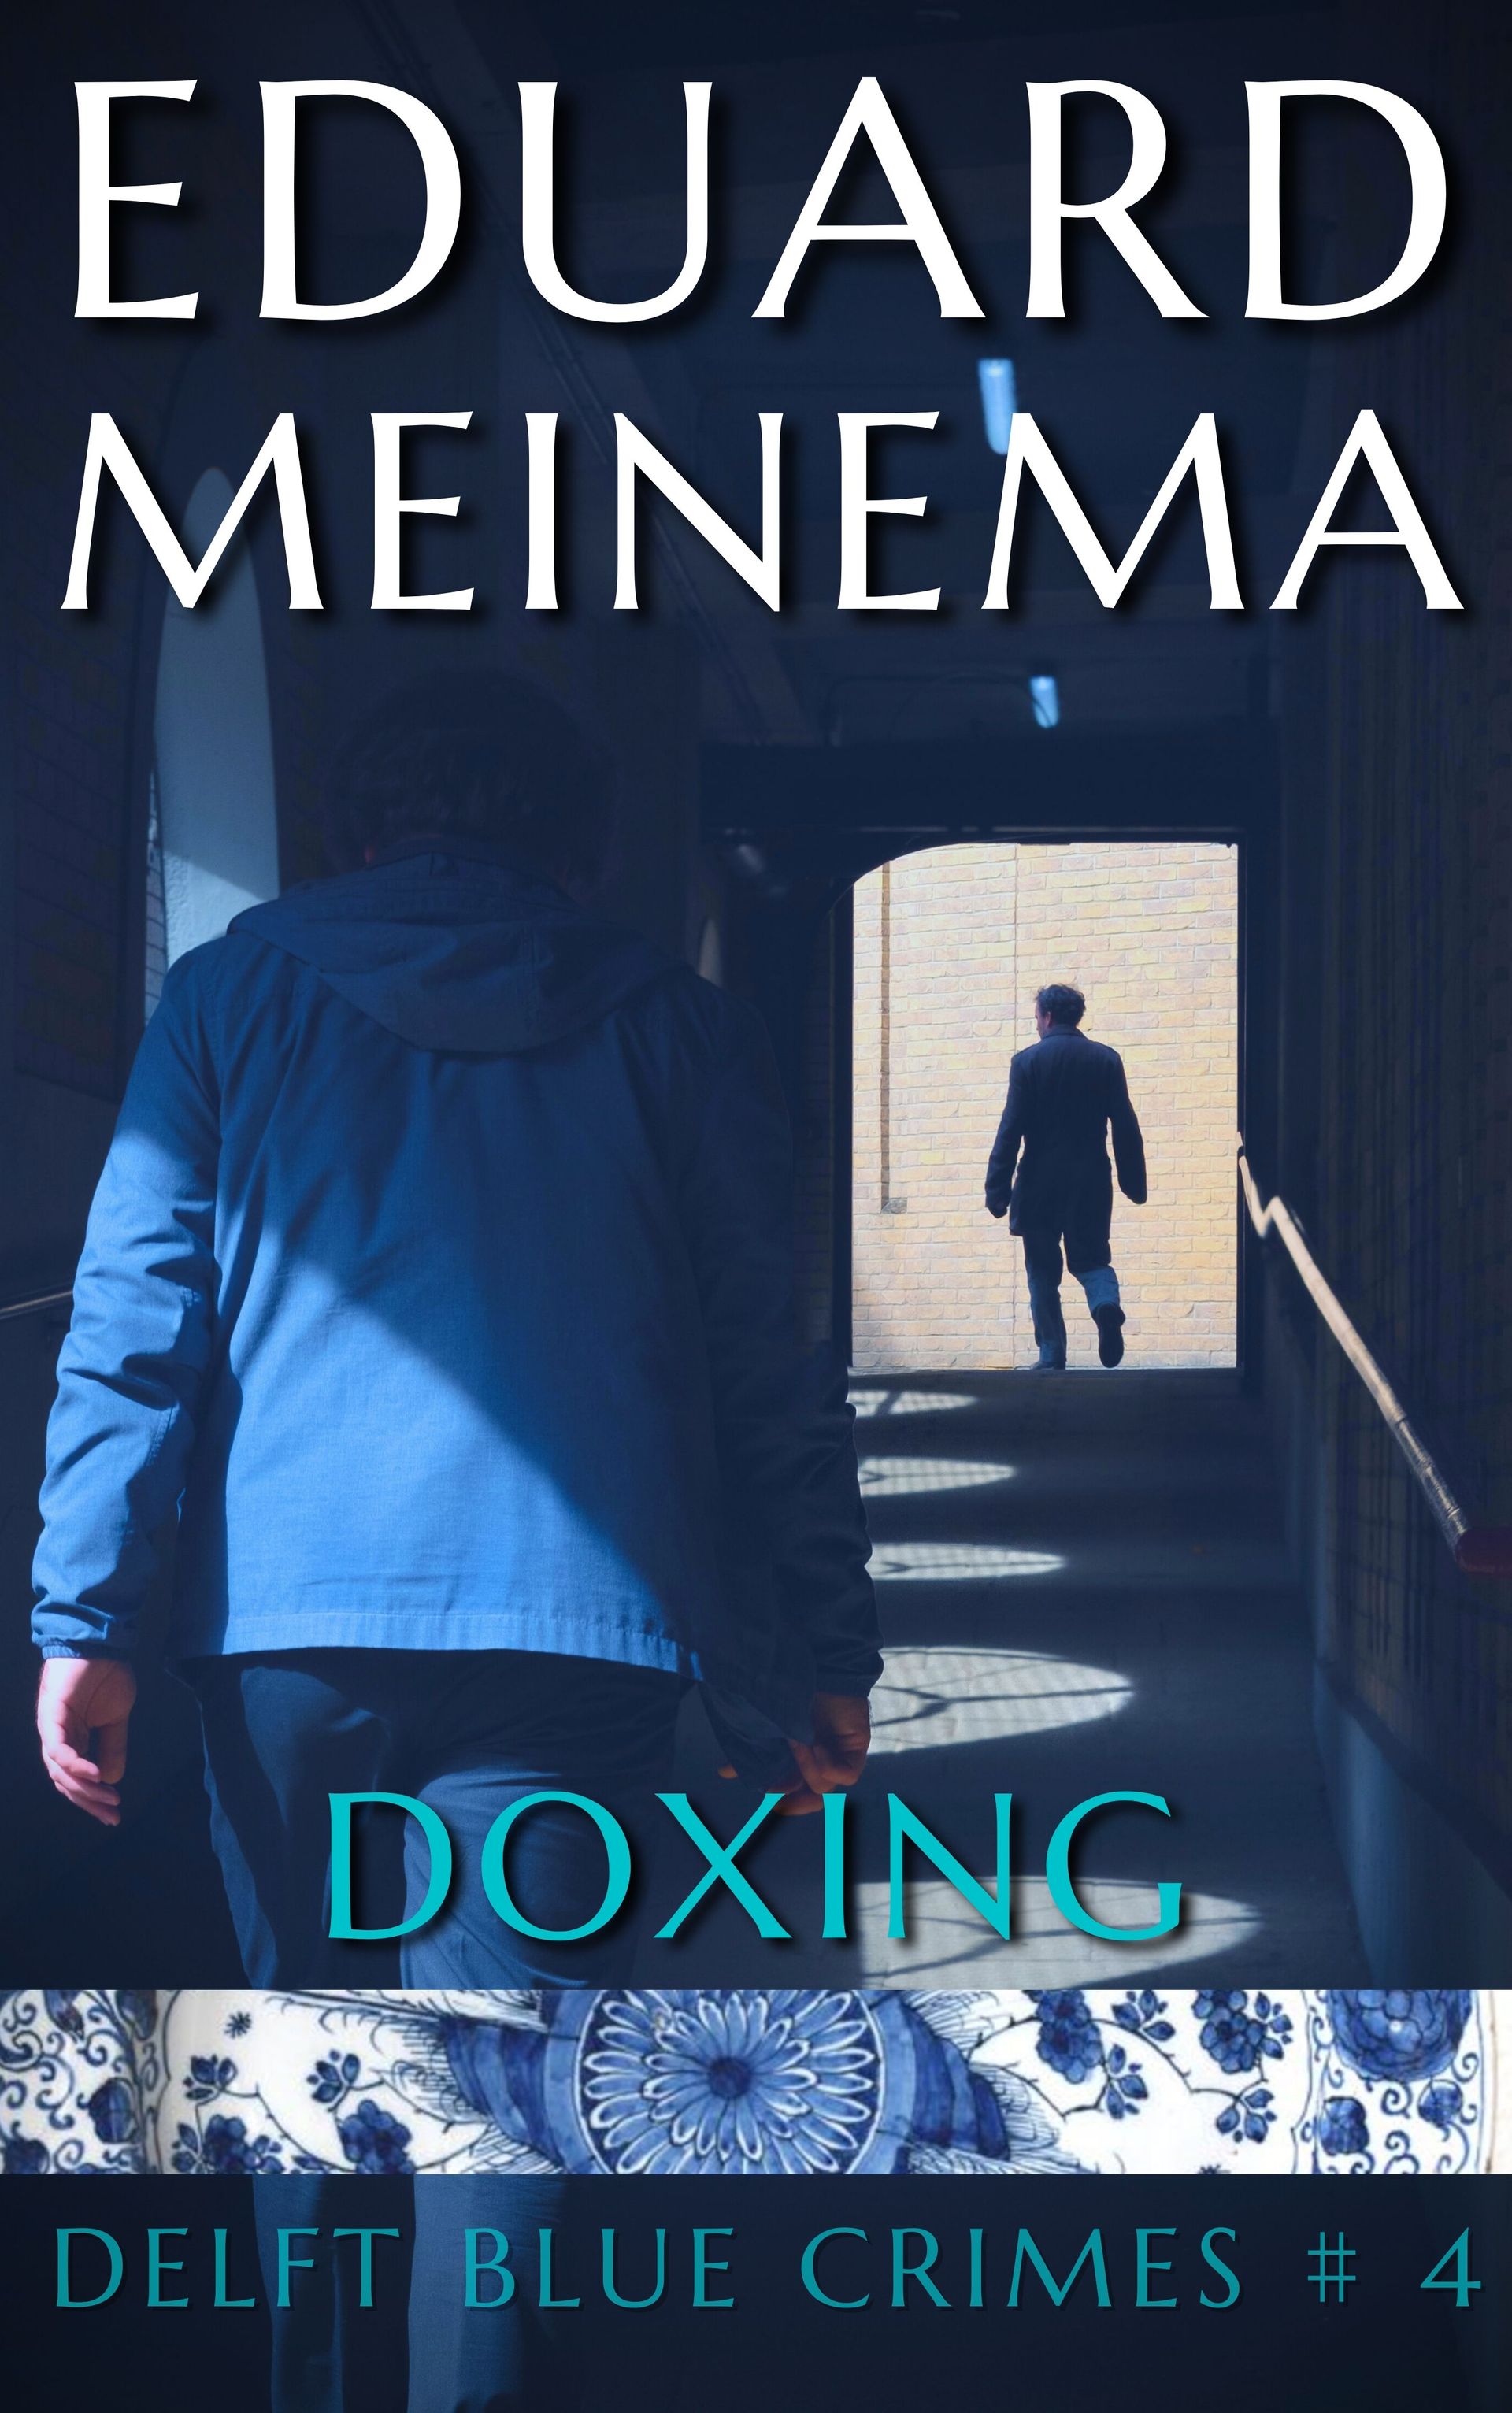 Delft Blue Crimes #4 Doxing by Eduard Meinema. Buy ebook now, directly from the author.